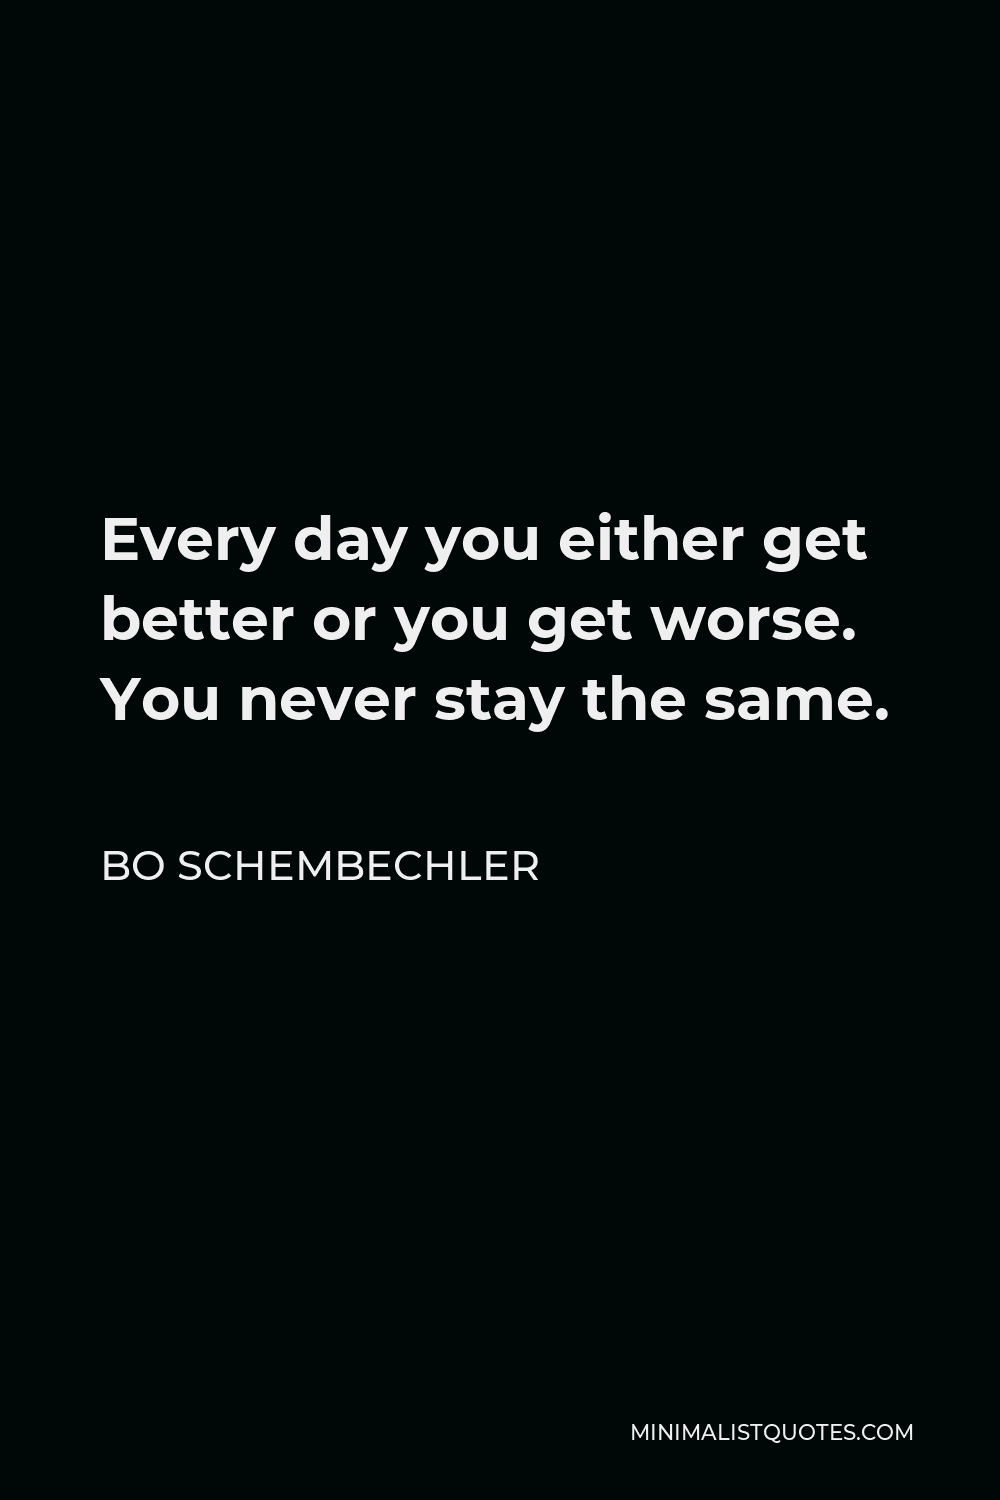 Bo Schembechler Quote - Every day you either get better or you get worse. You never stay the same.